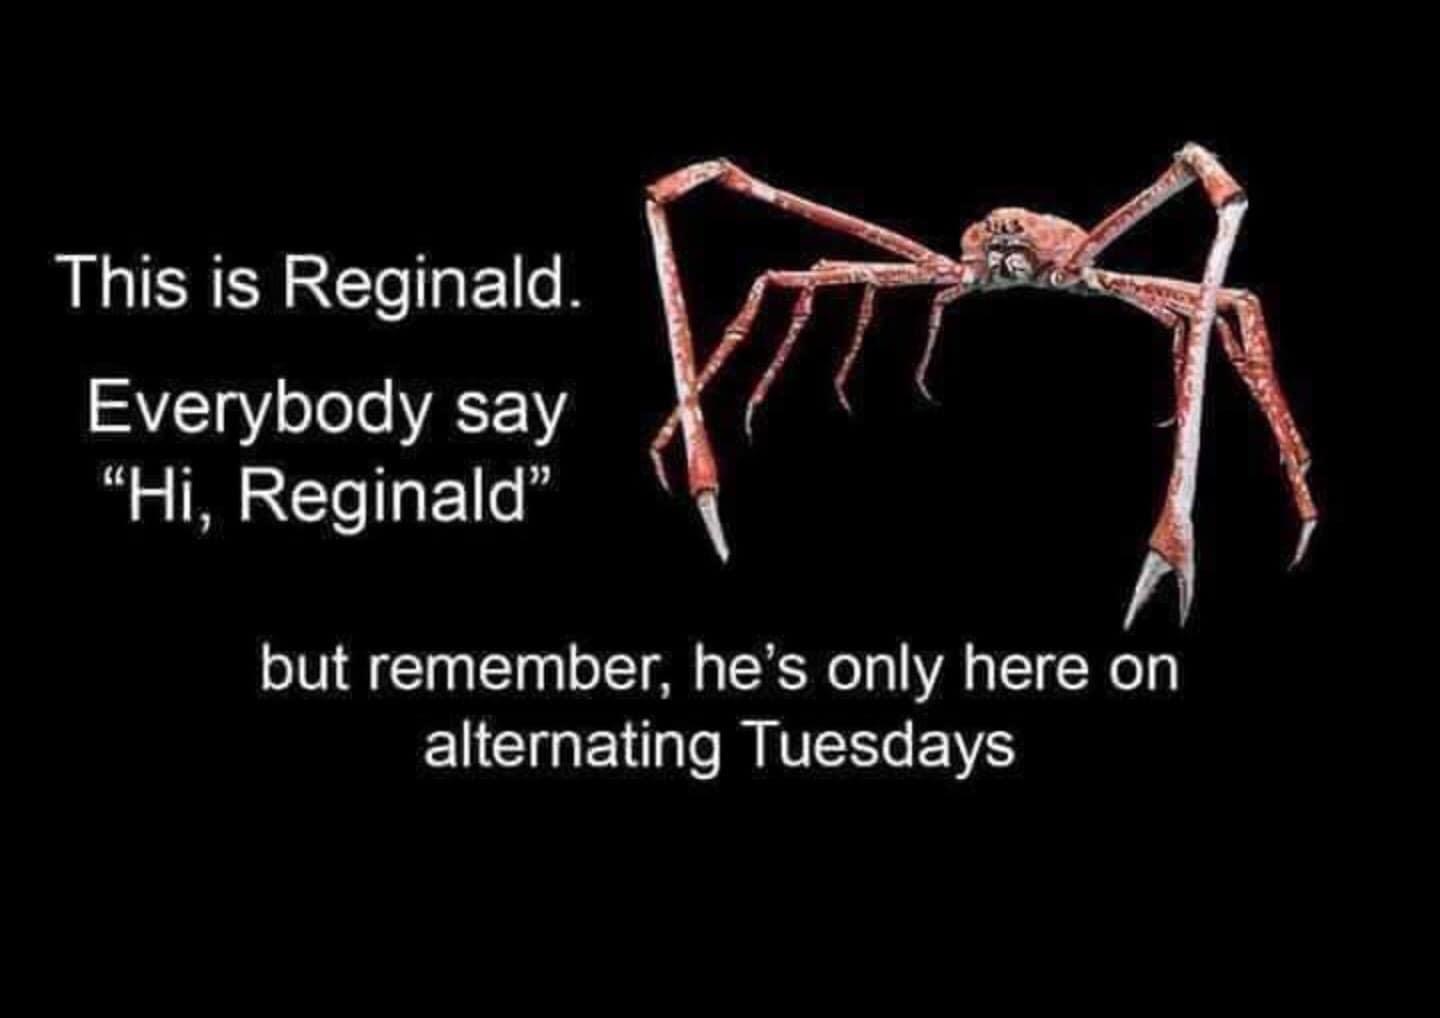 japanese spider crab animated - This is Reginald. Everybody say "Hi, Reginald" but remember, he's only here on alternating Tuesdays